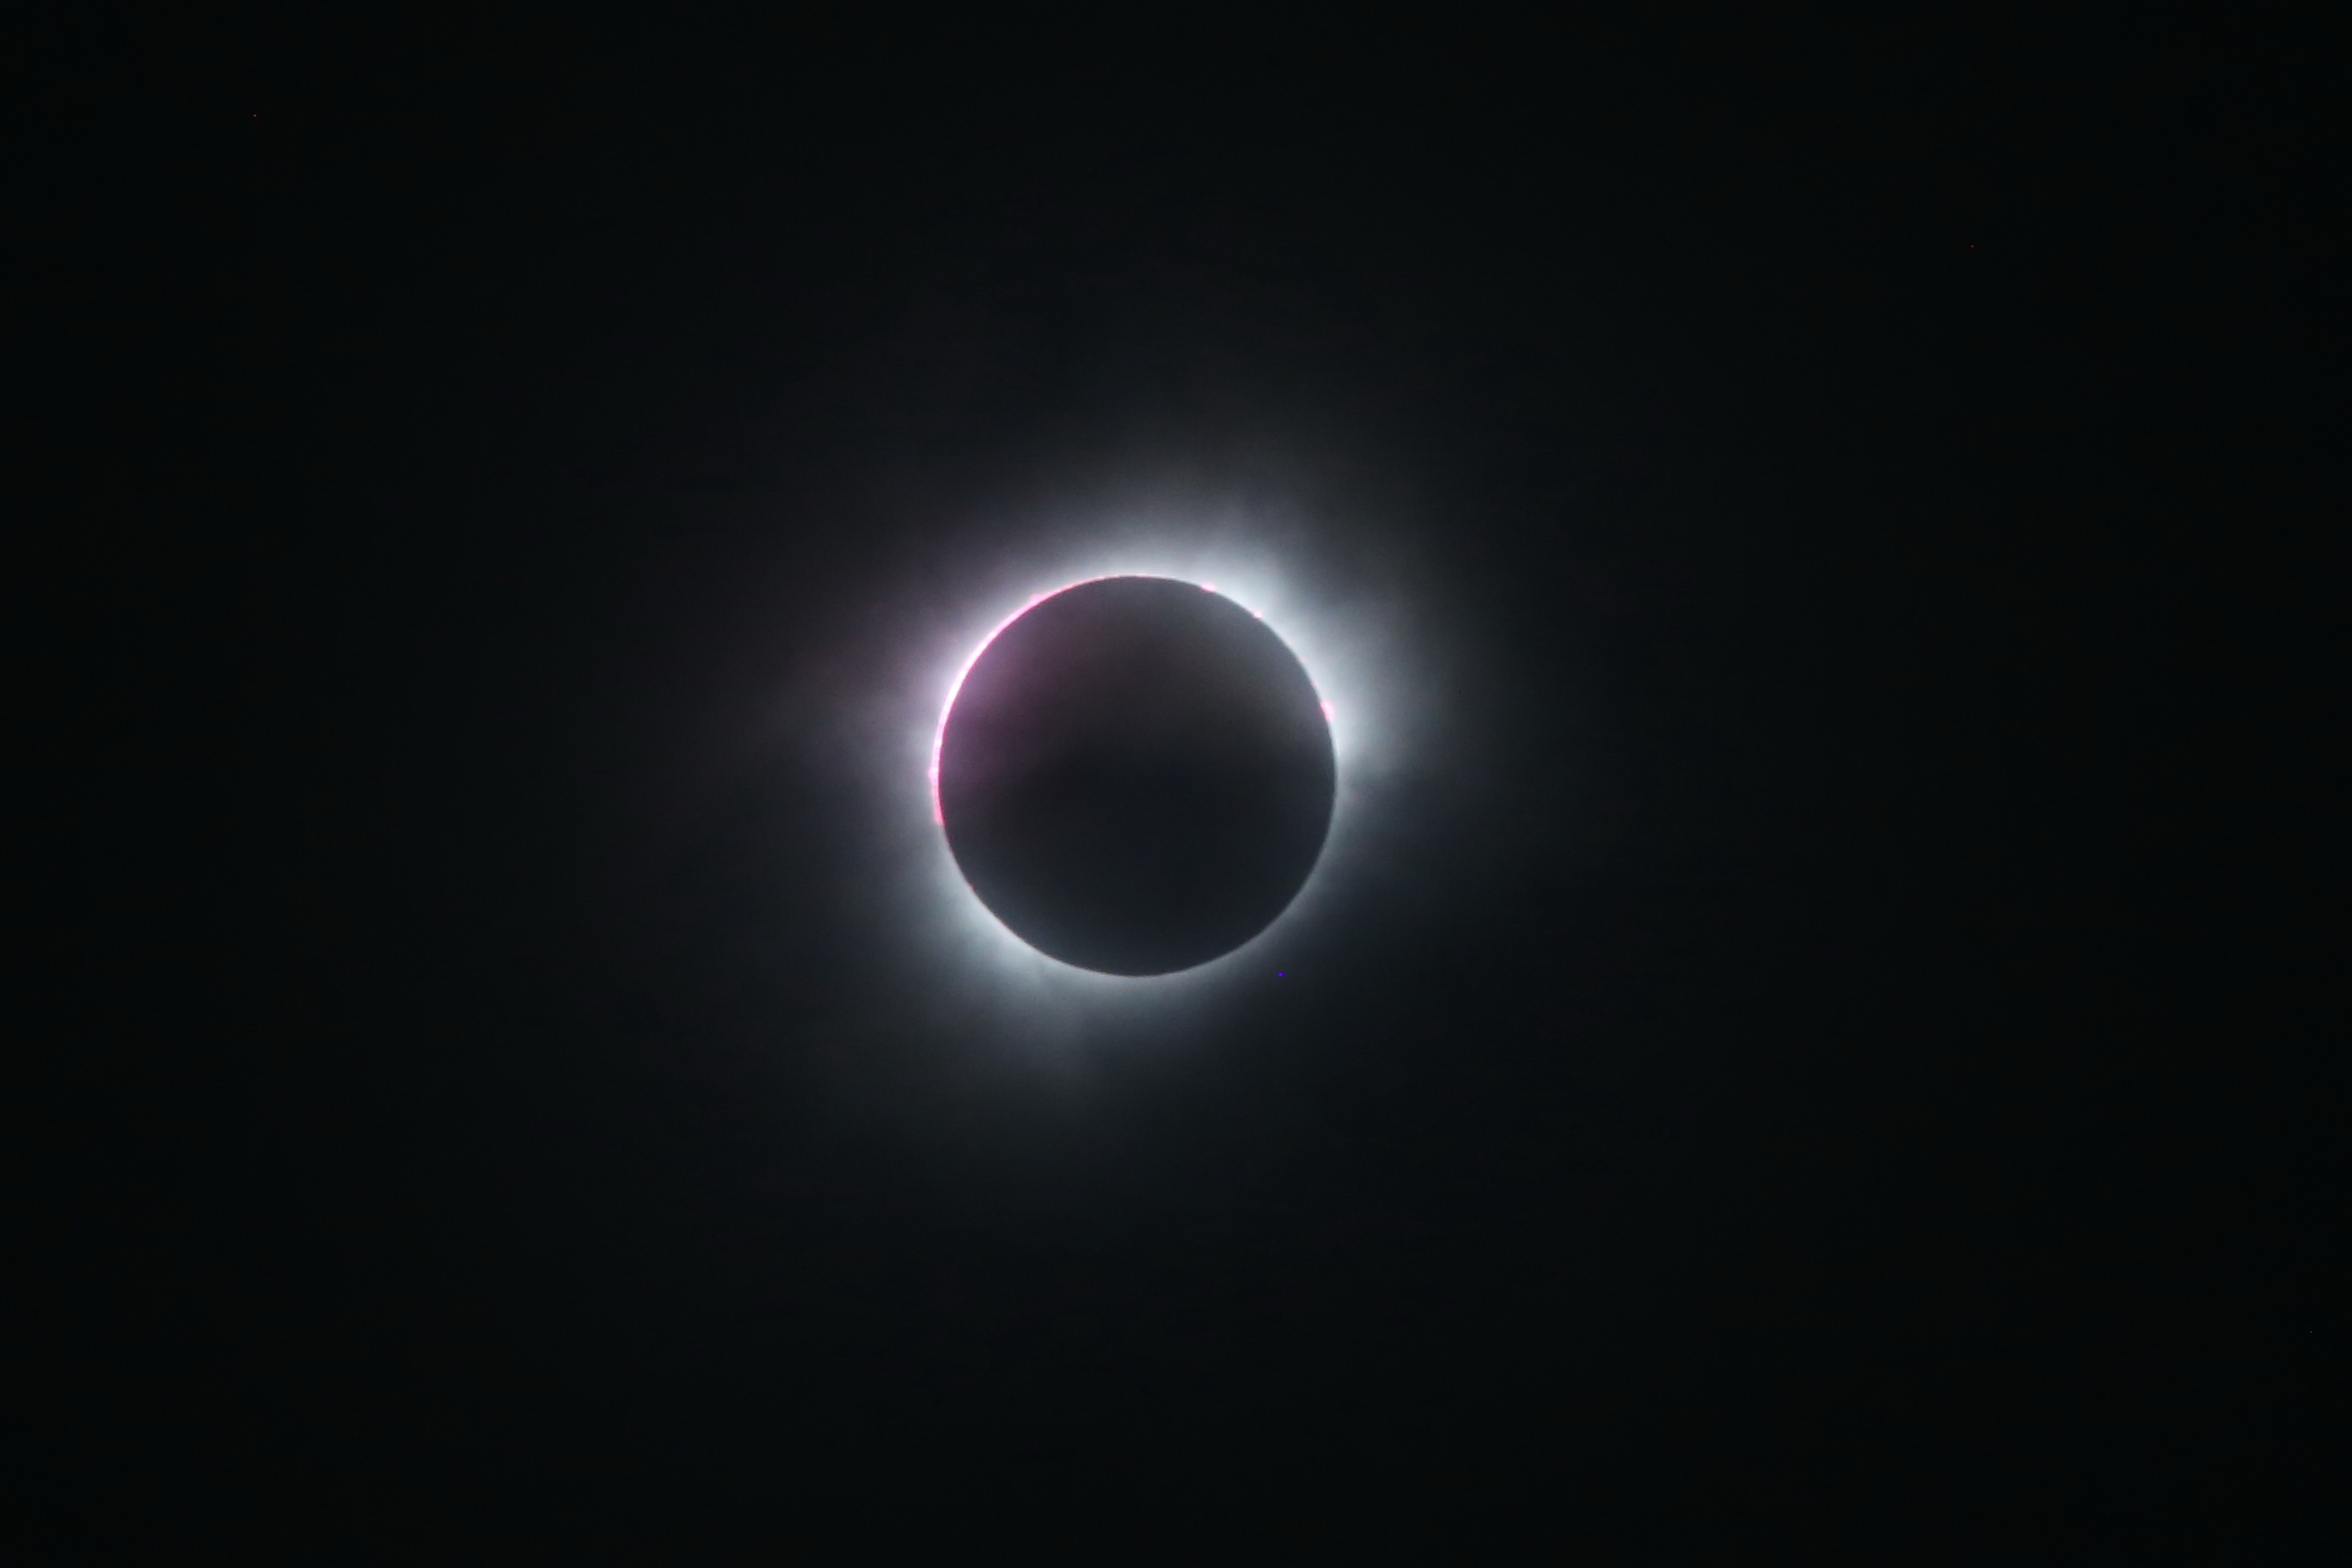 Totality: 1 minute, 20 seconds of totality